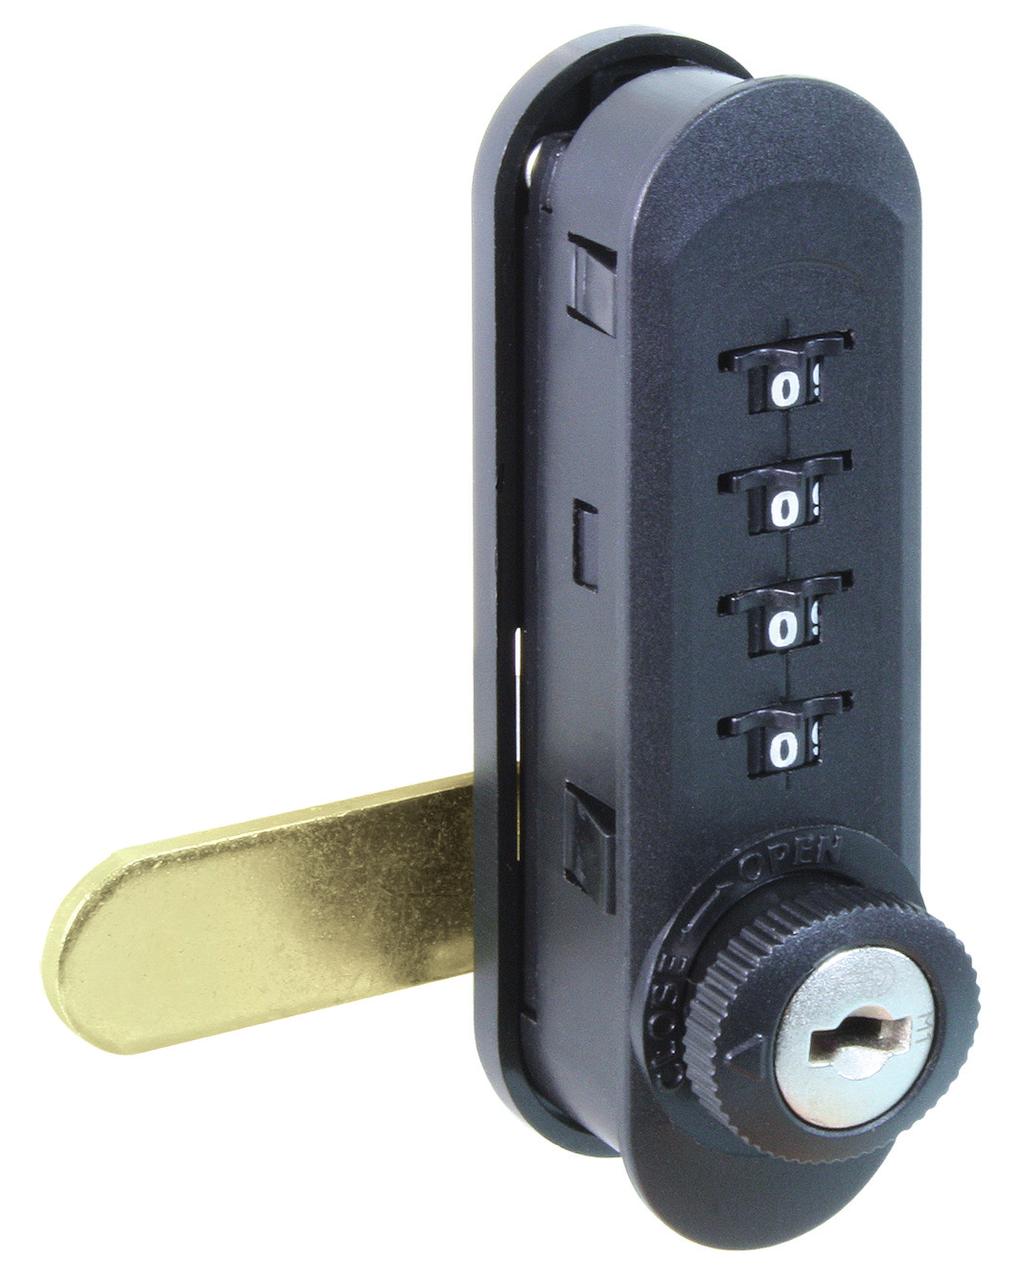 4 Digit Combination Lock Vertical 8 V 1, possible combinations Each lock comes with modes: Public: multiple users Personal: single user Black plastic housing and metal inner workings Suitable for